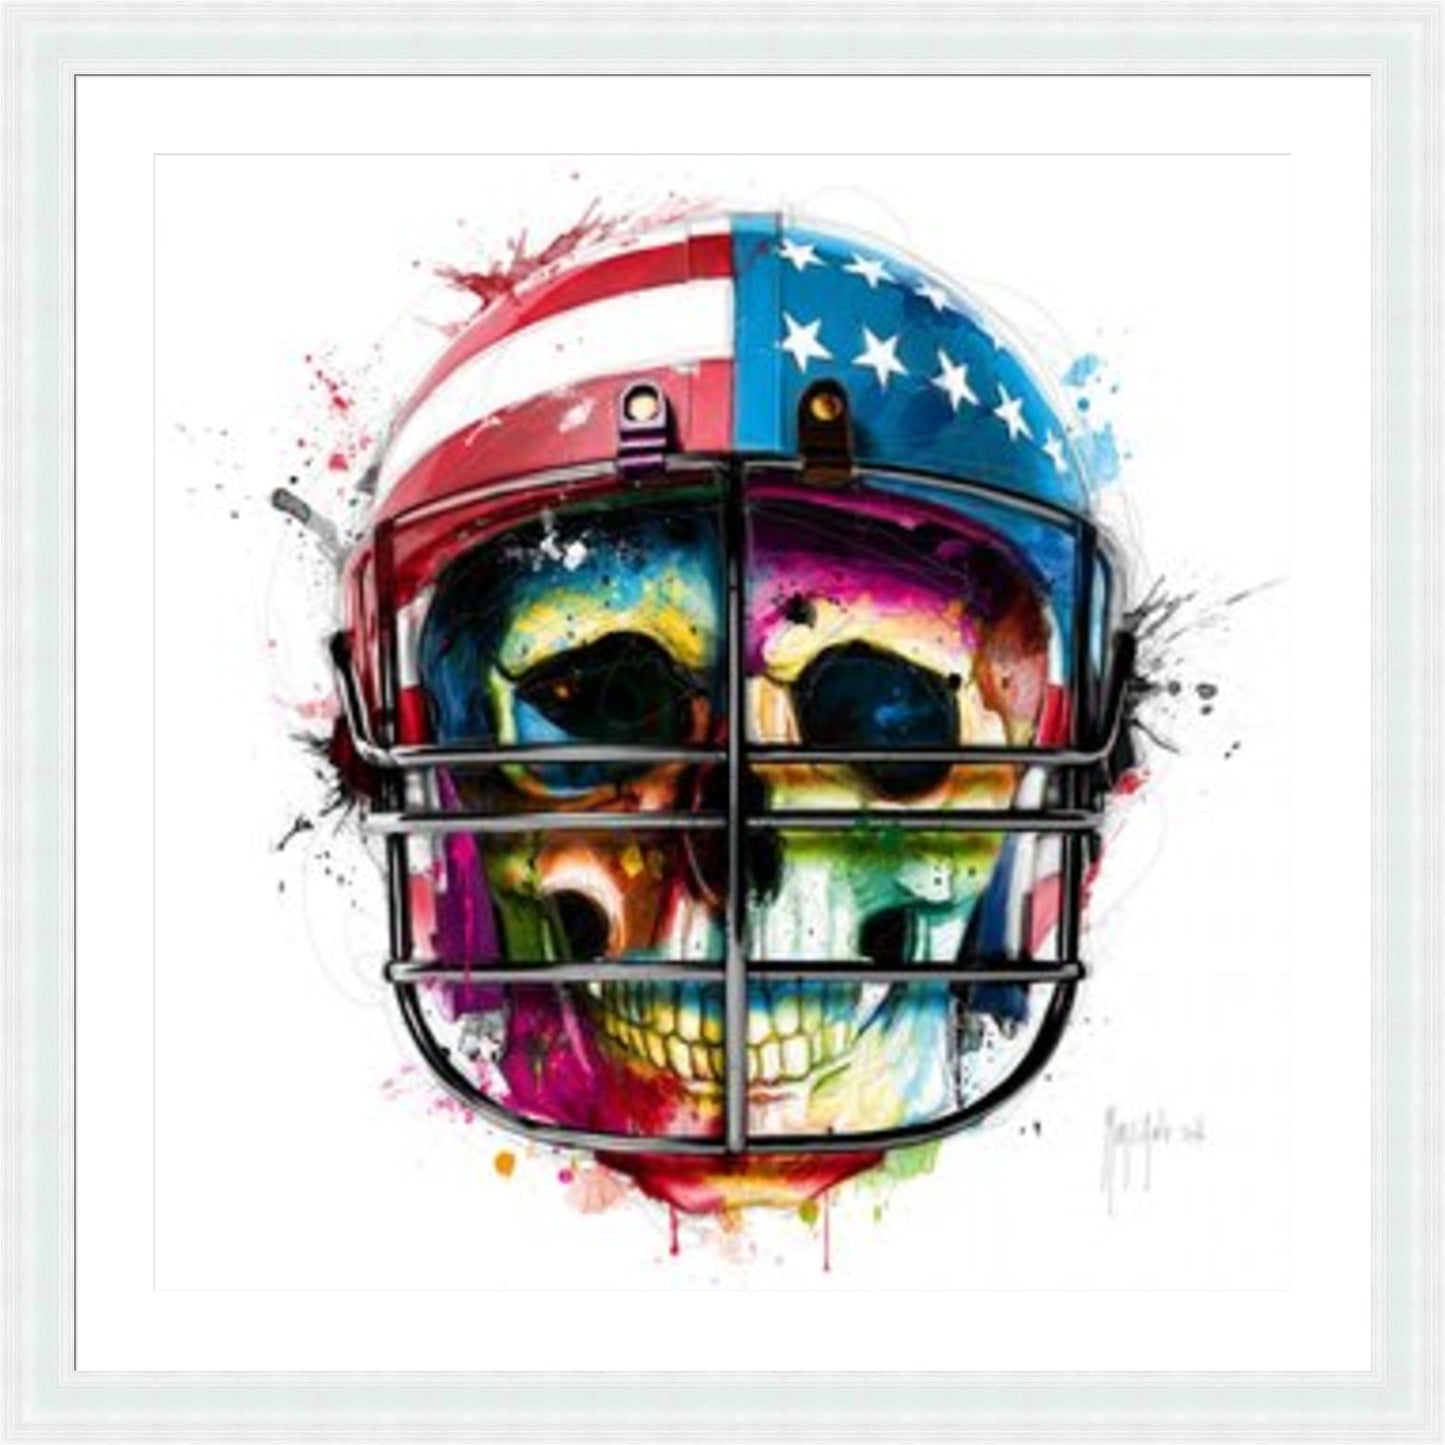 Born in the USA Skull by Patrice Murciano